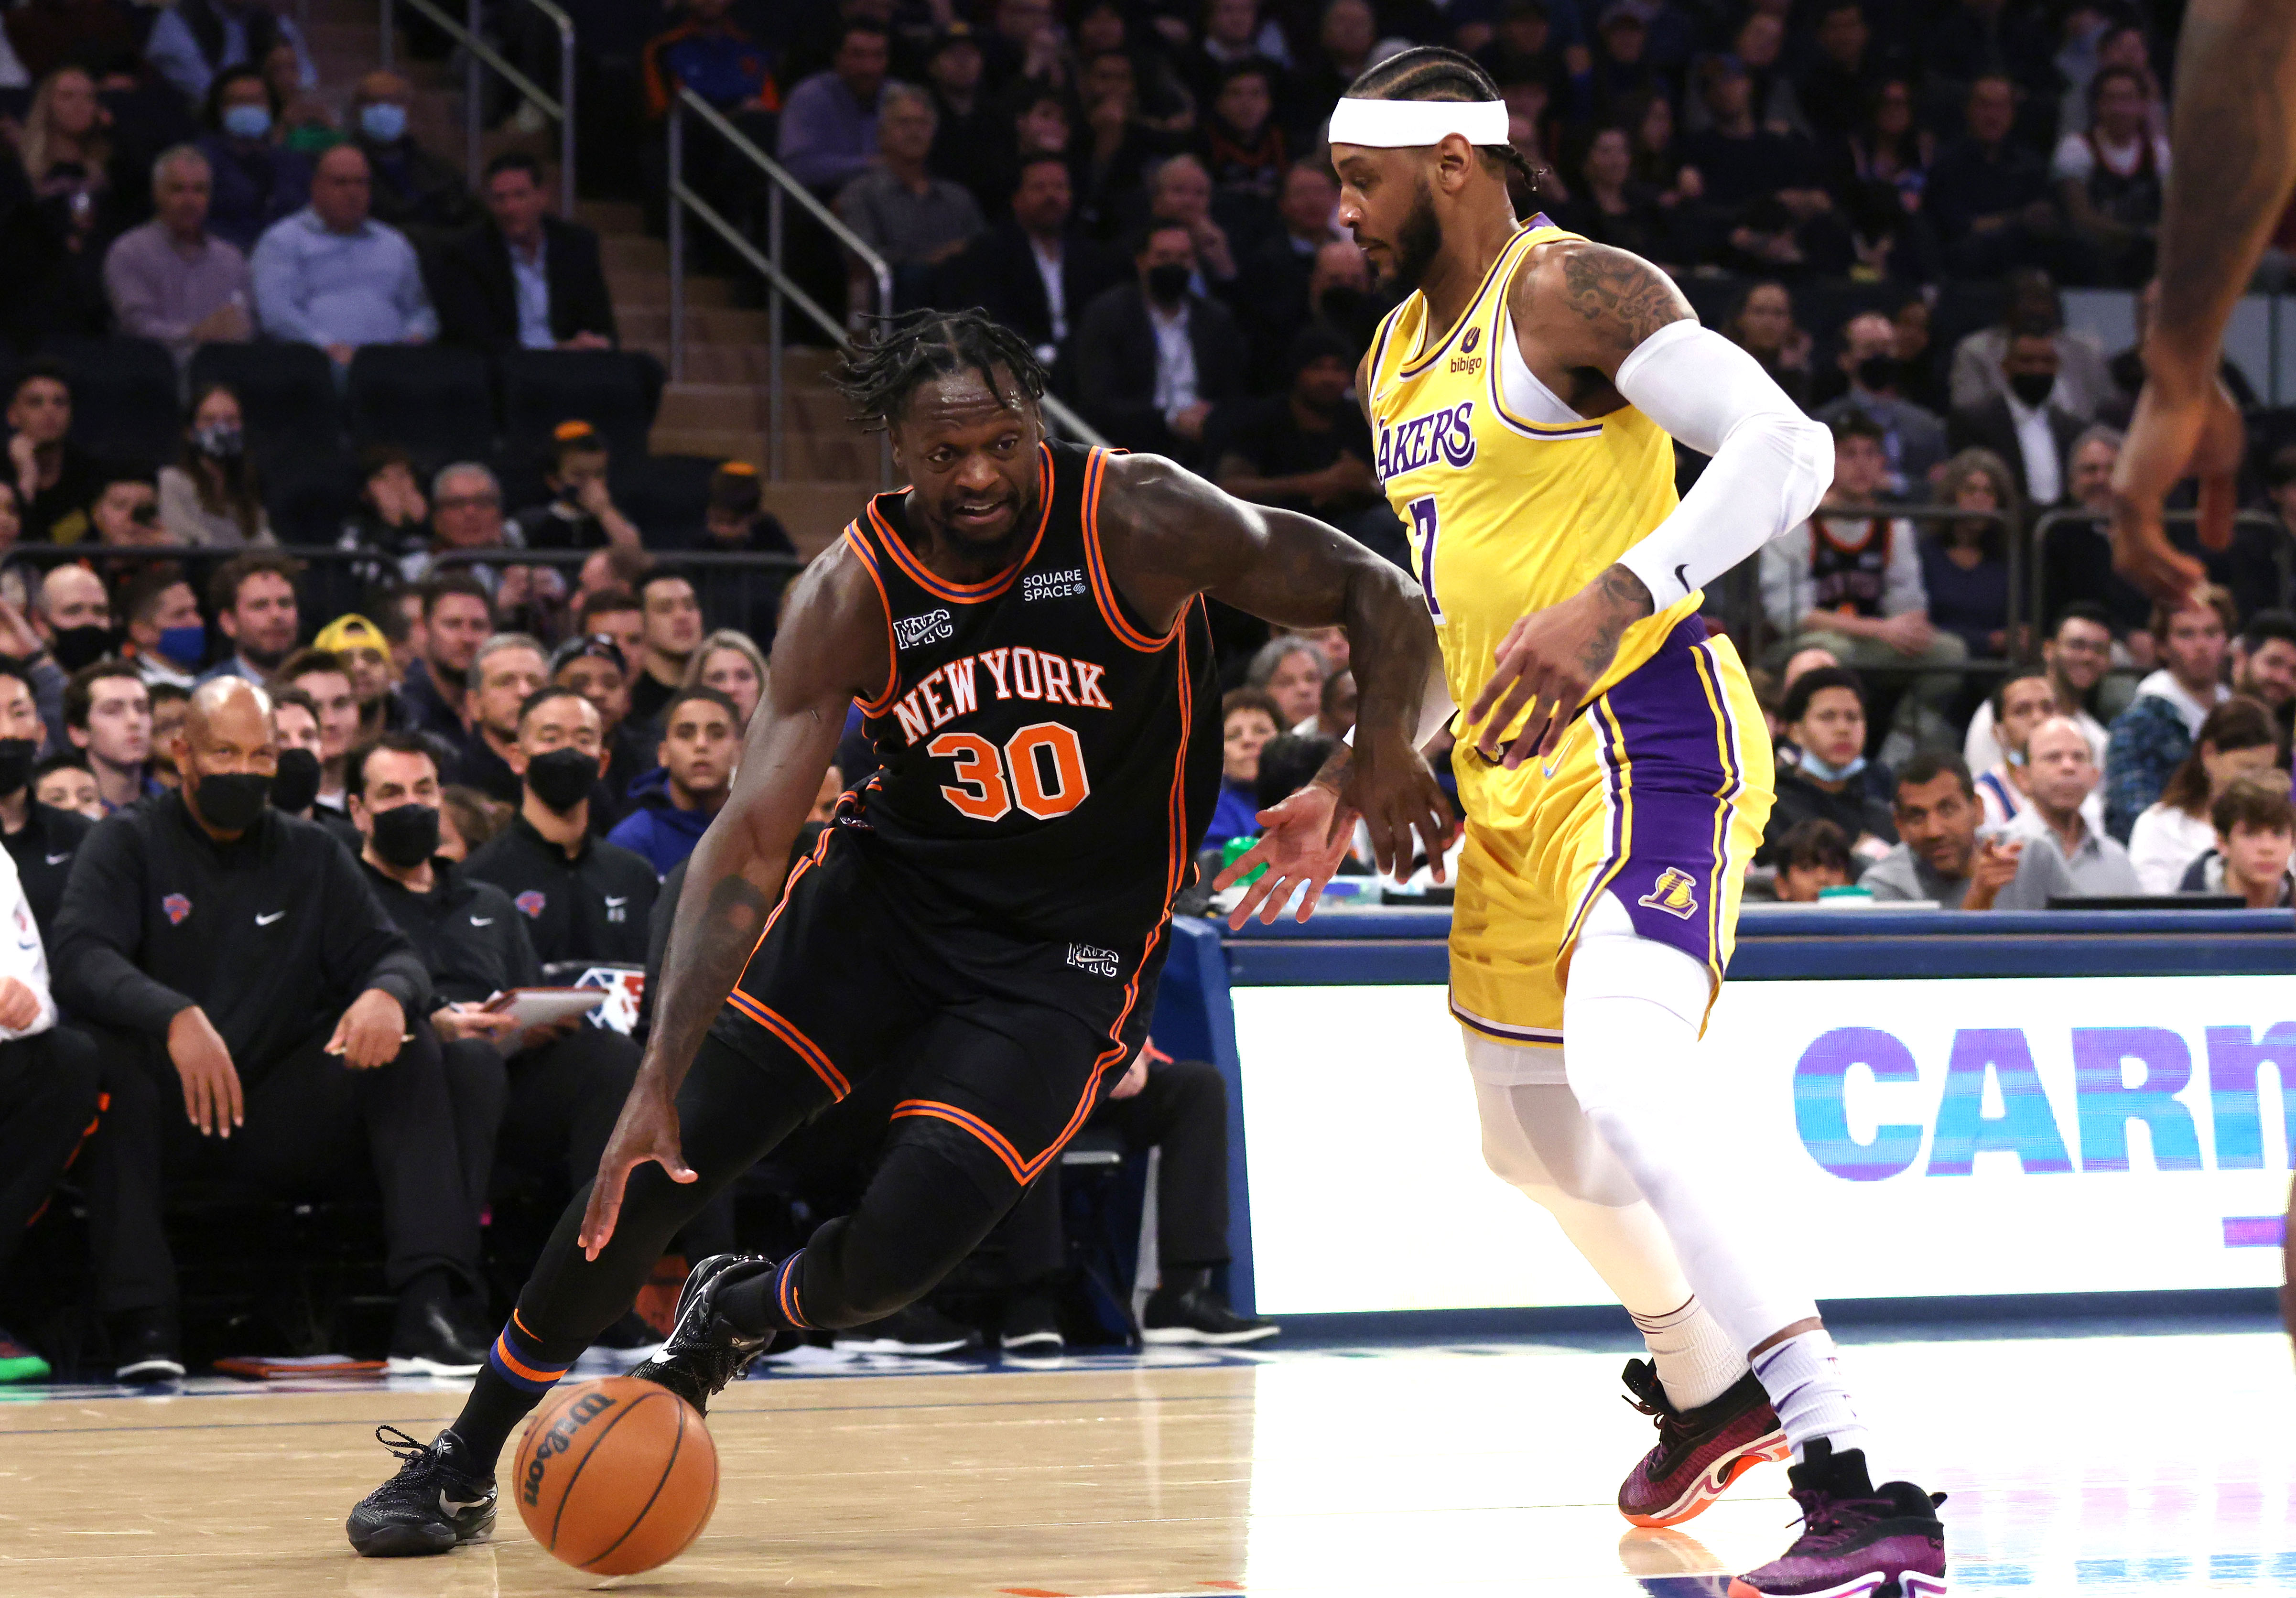 Julius Randle drives past Carmelo Anthony during the Knicks' win.